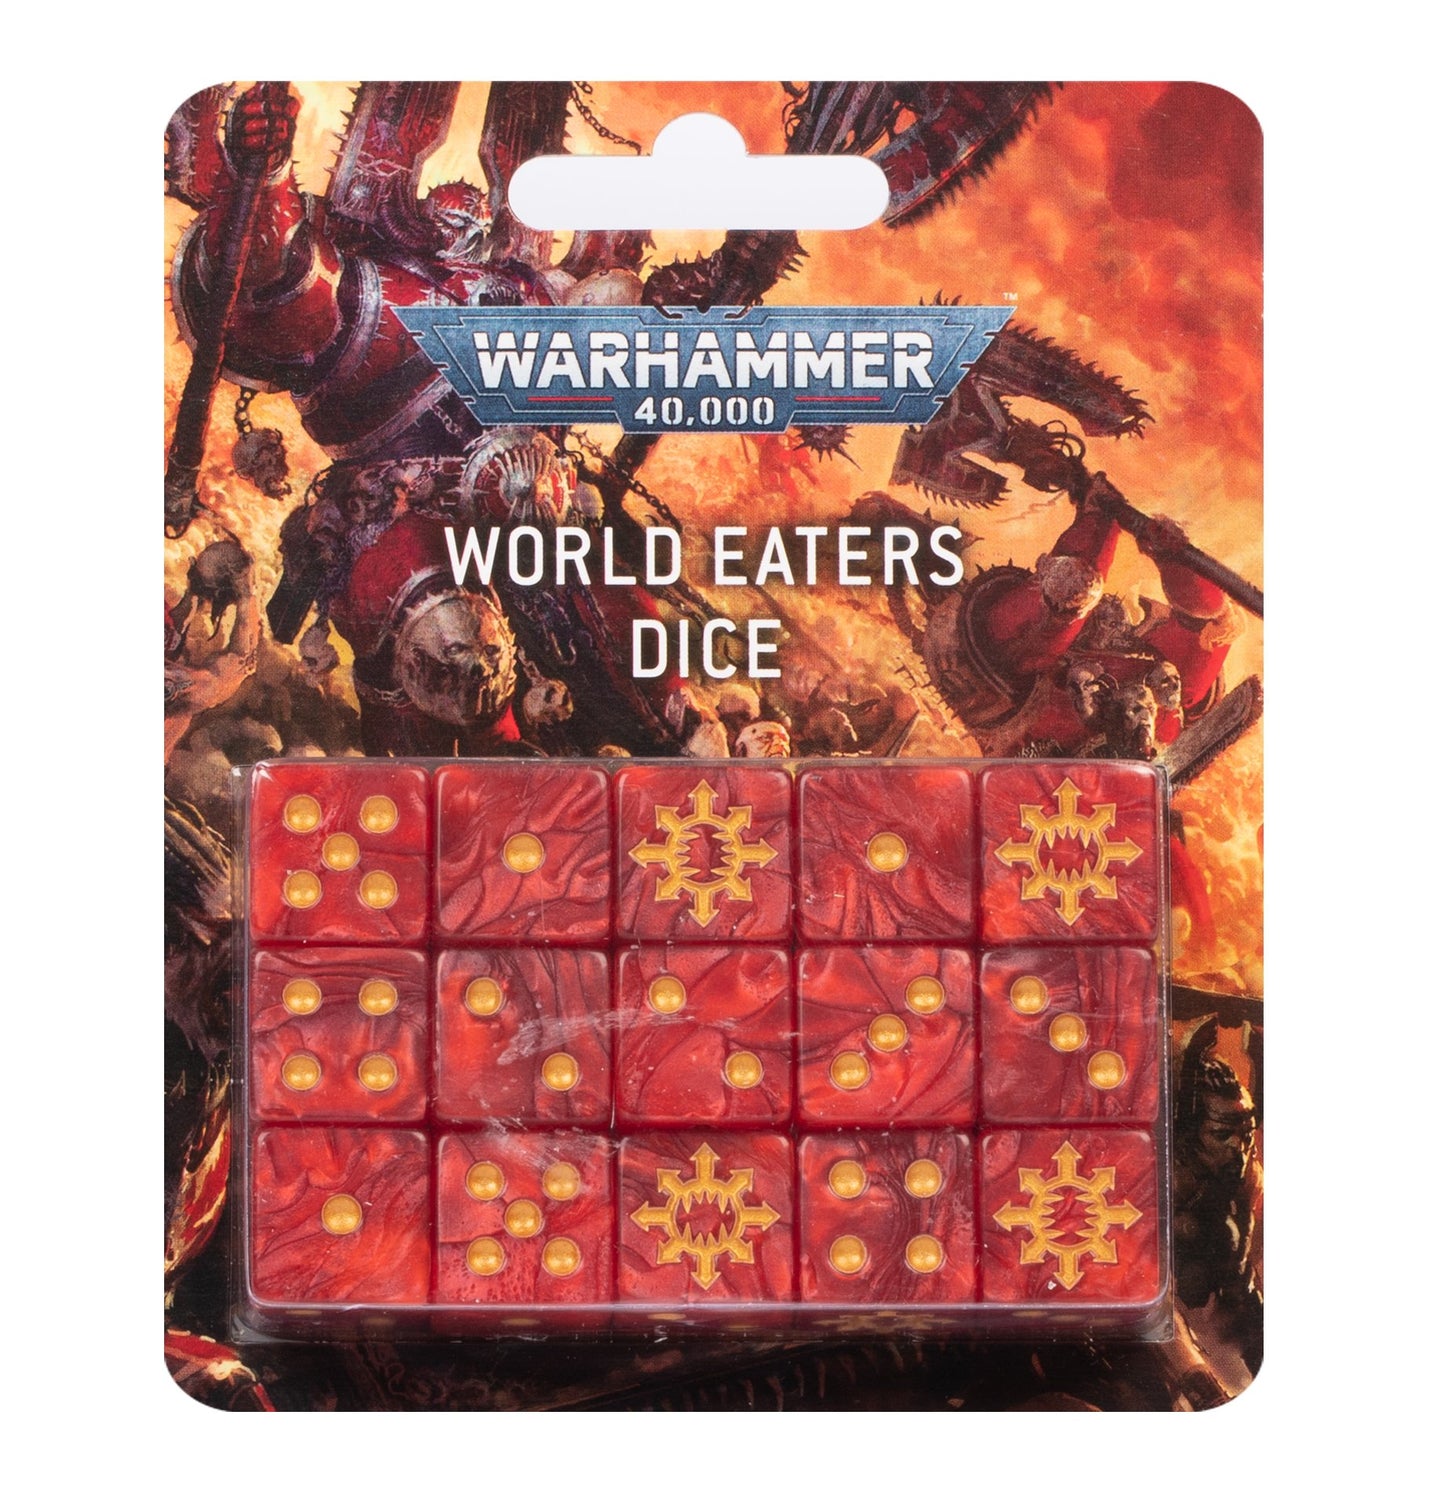 LAST ONE - Warhammer 40,000: World Eaters Dice